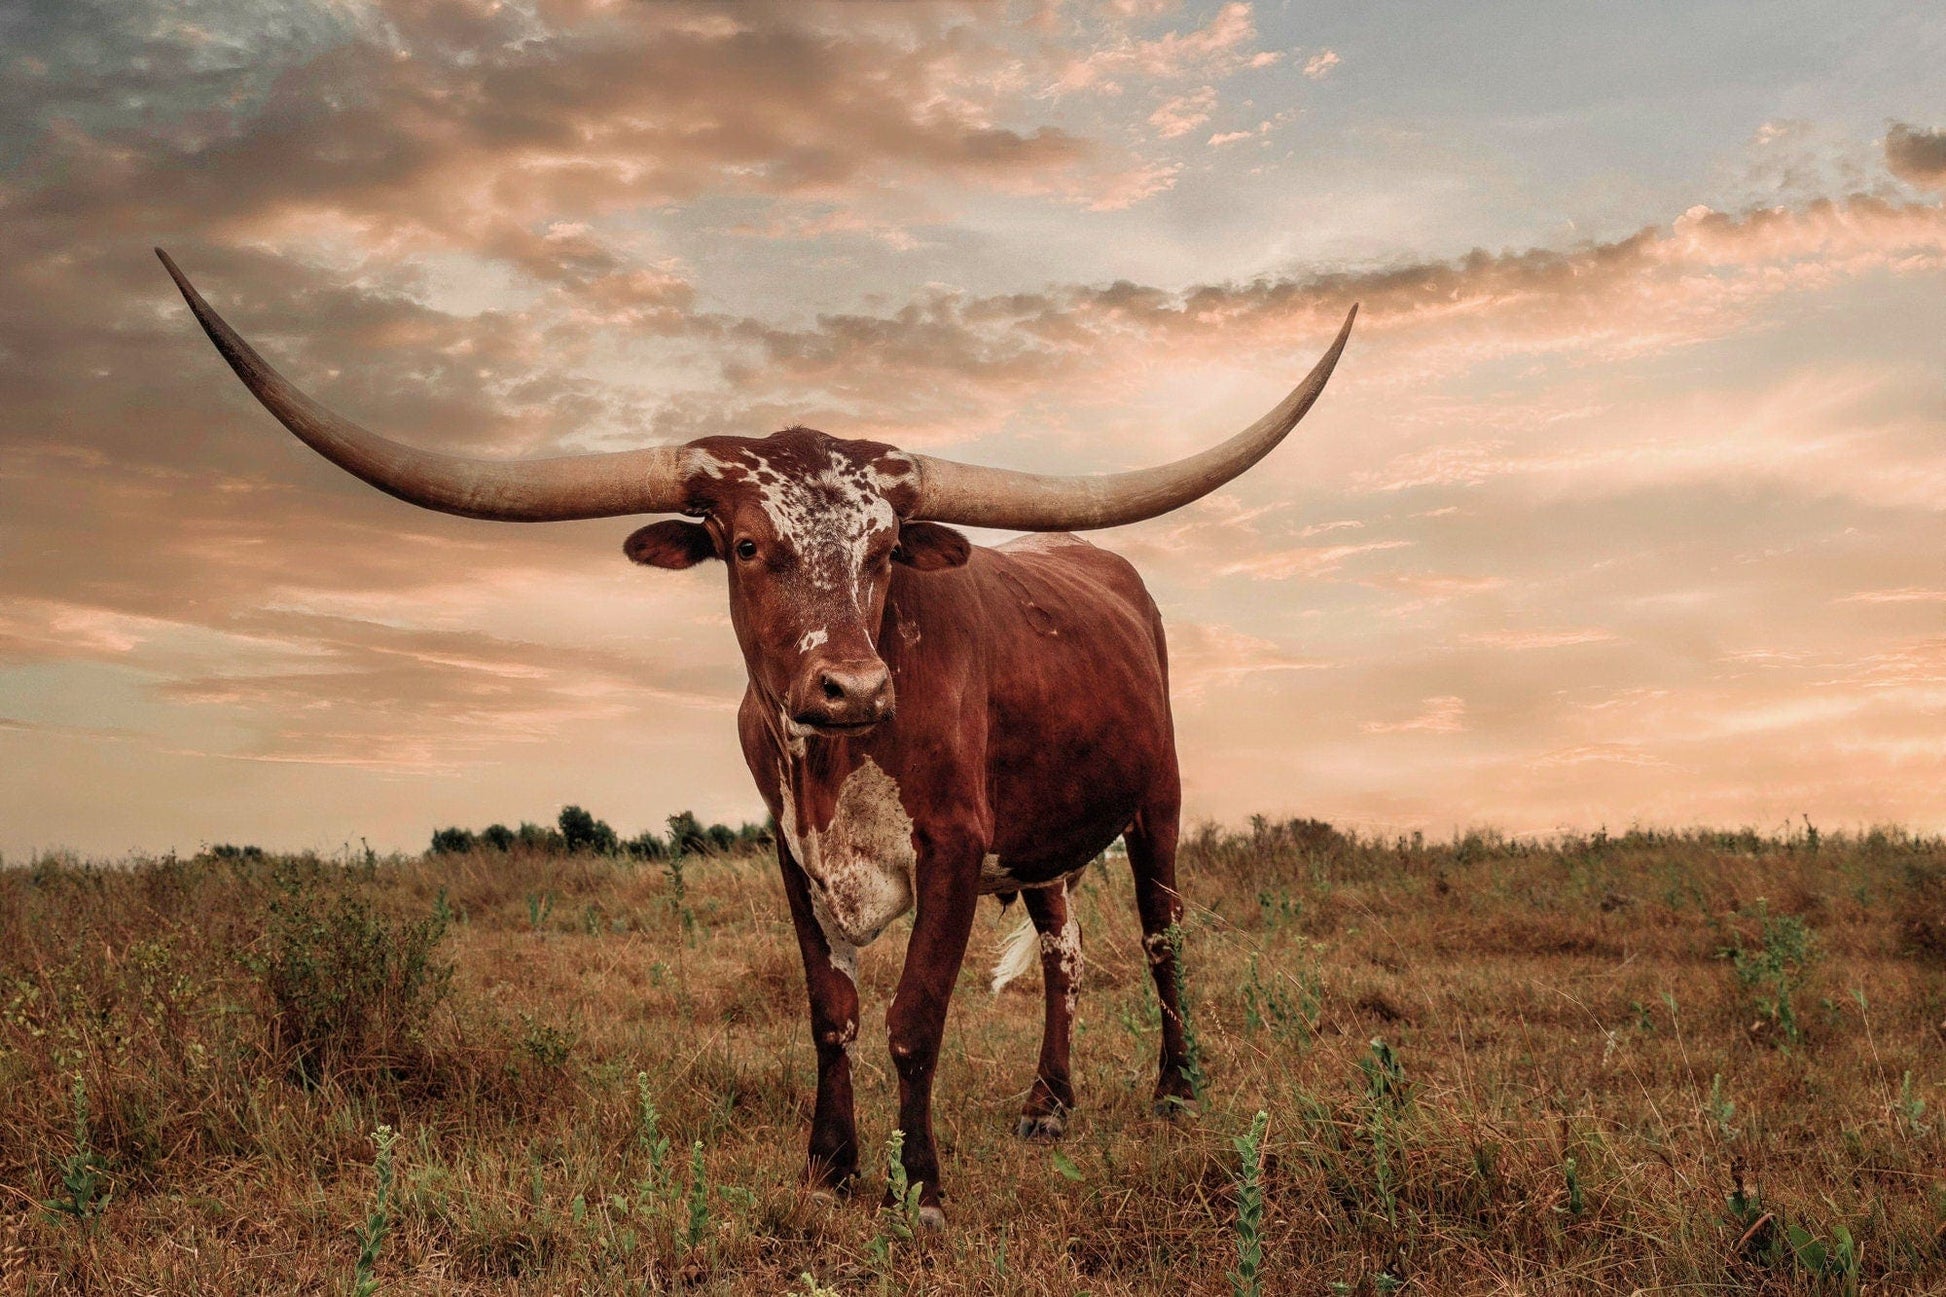 Southwest Style Longhorn Art Paper Photo Print / 12 x 18 Inches Wall Art Teri James Photography